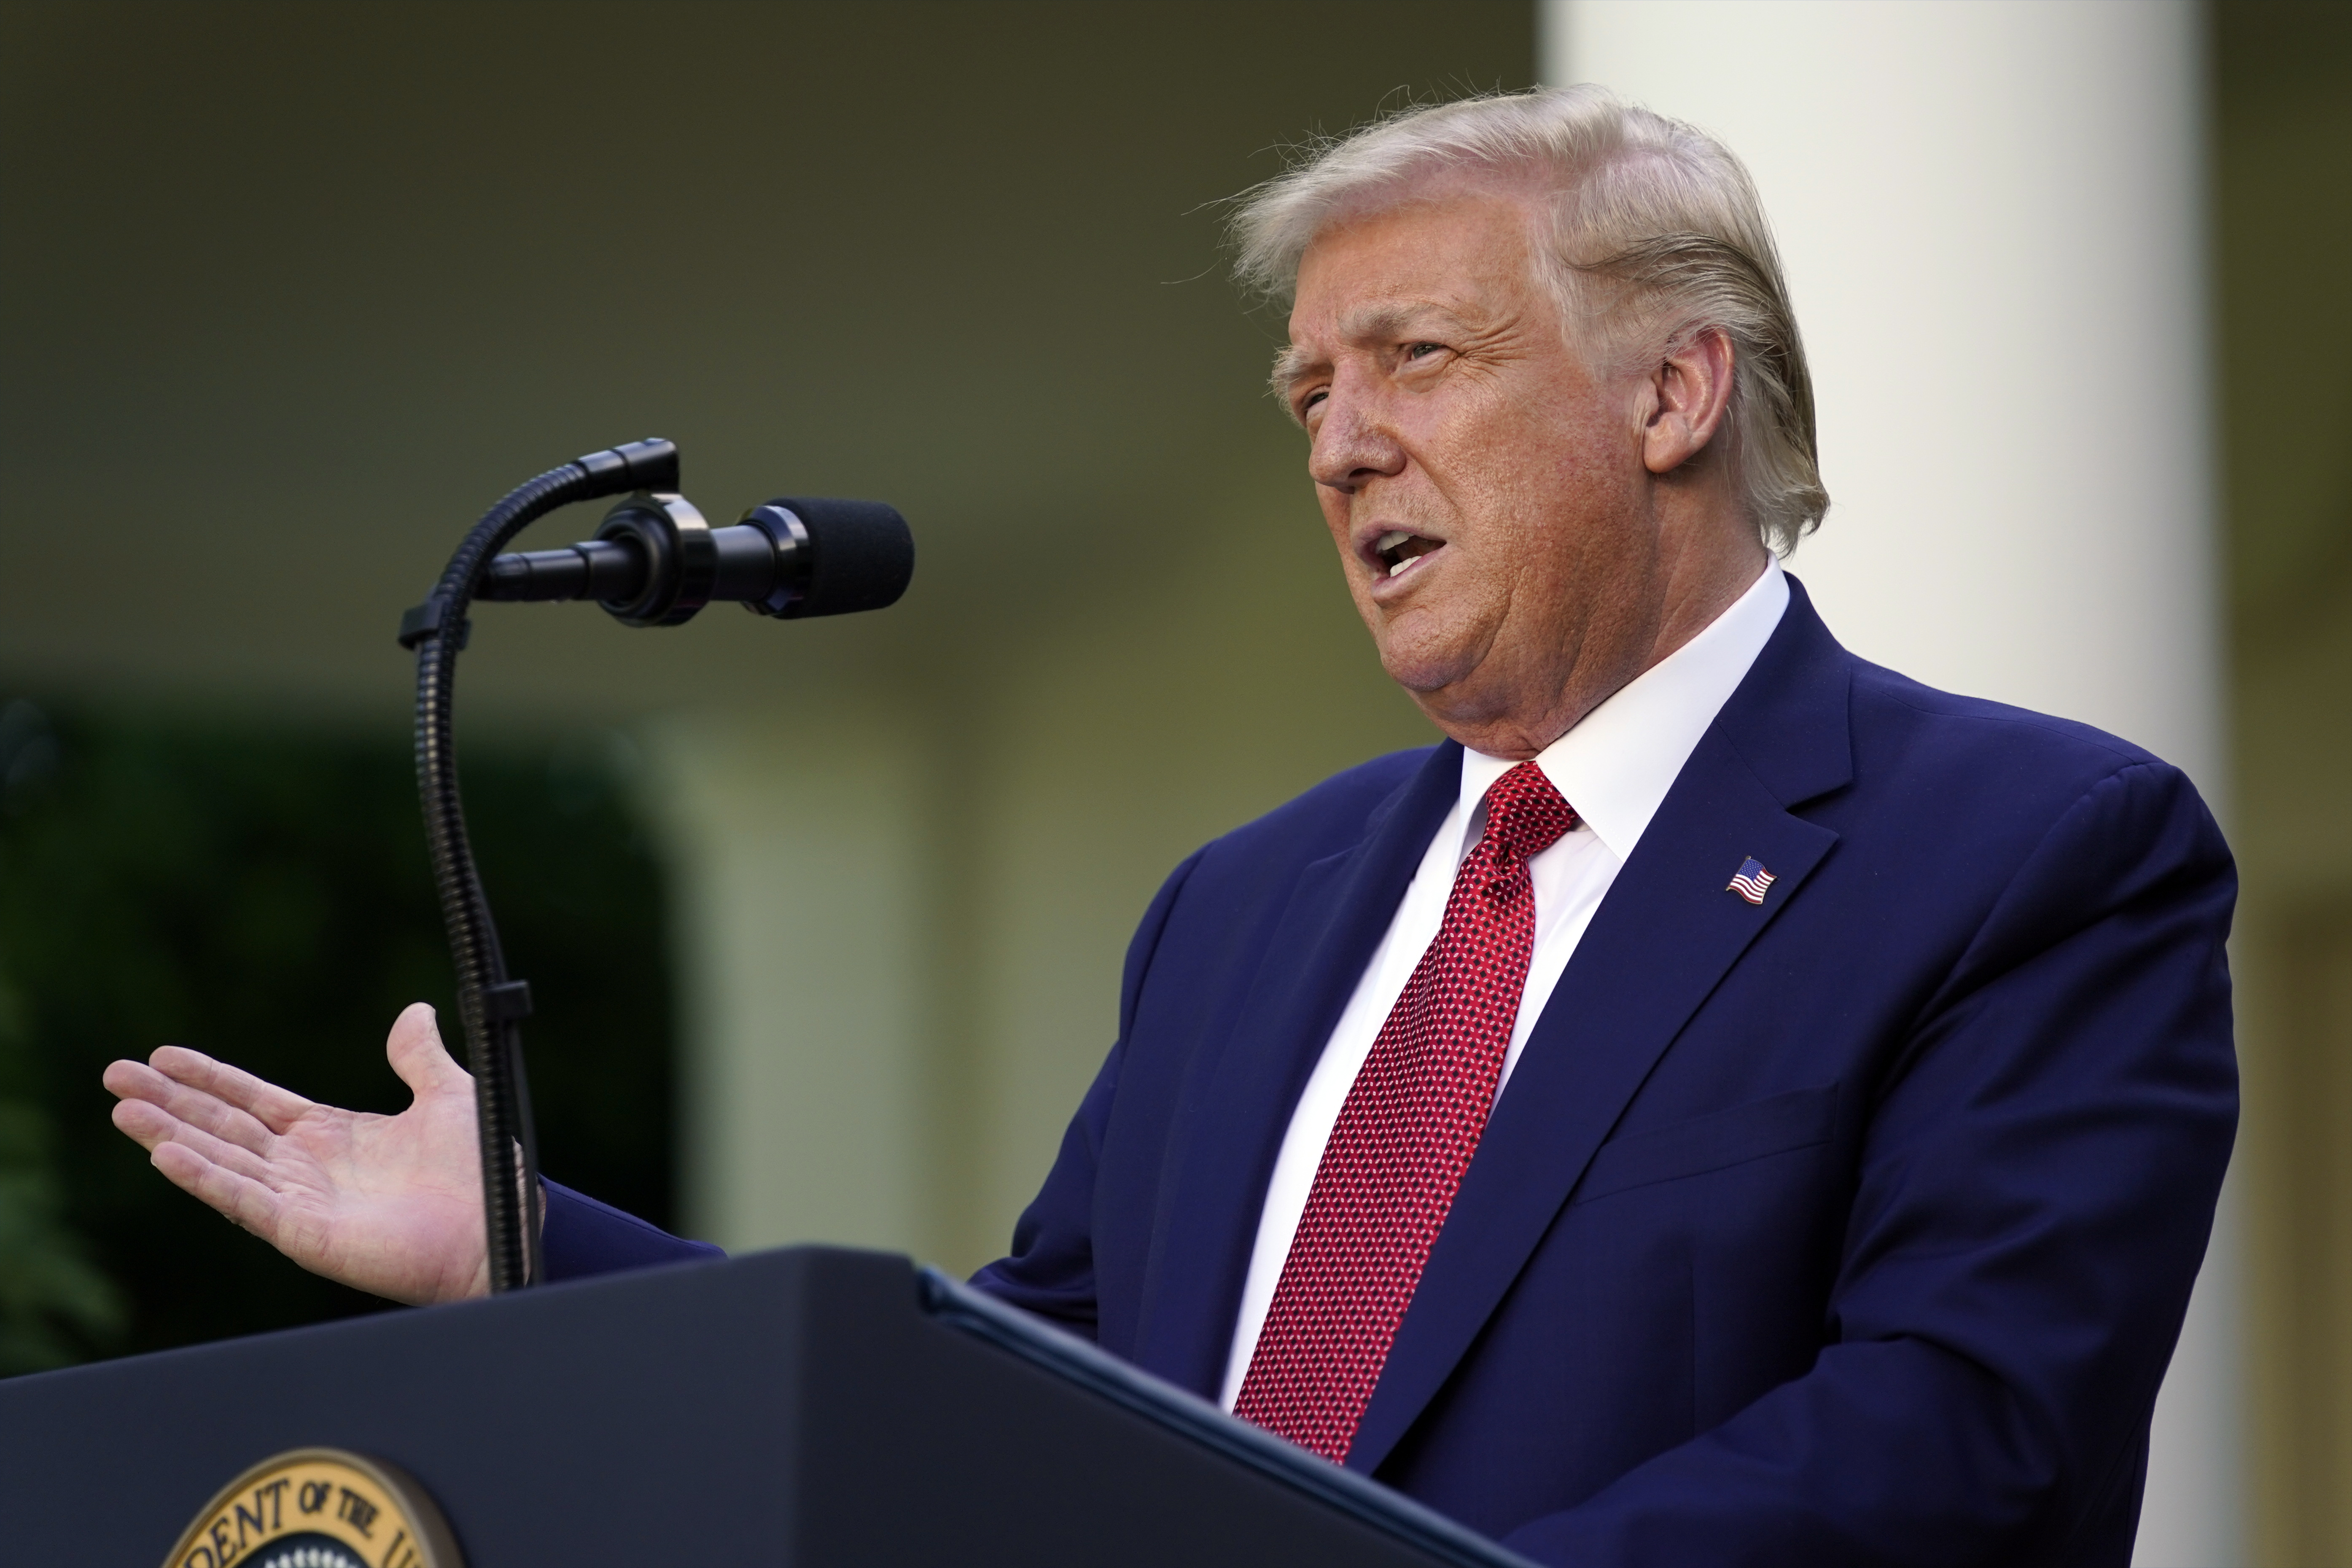 President Donald Trump speaks during a news conference in the Rose Garden of the White House, Tuesday, July 14, 2020, in Washington. Photo: AP